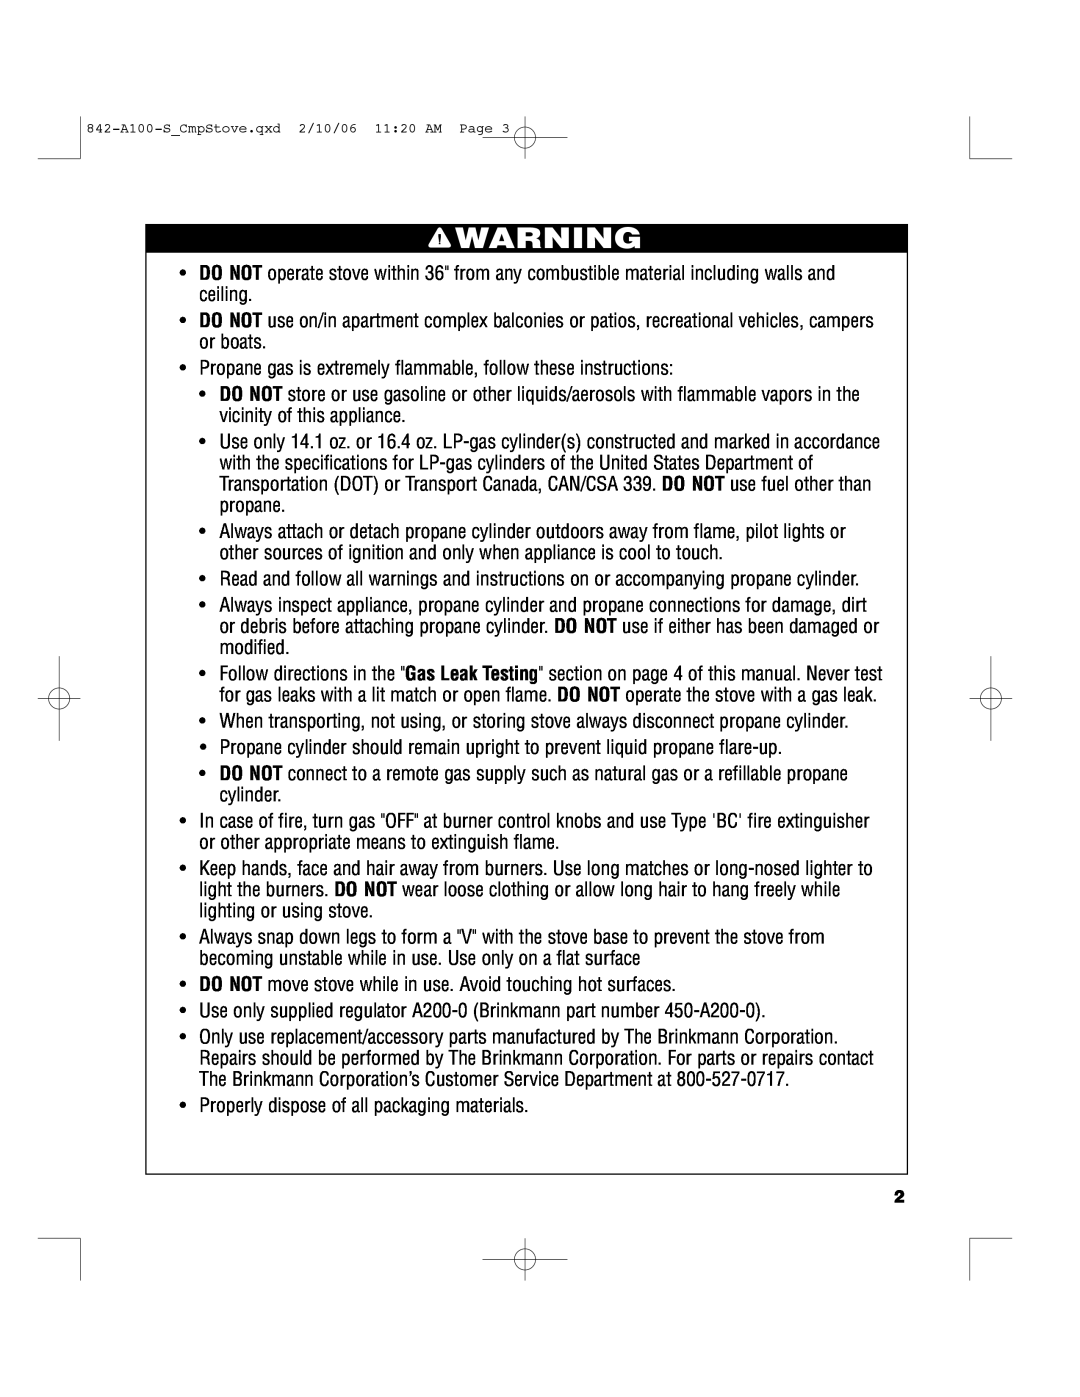 Brinkmann 842-A100-S owner manual Propane gas is extremely flammable, follow these instructions 